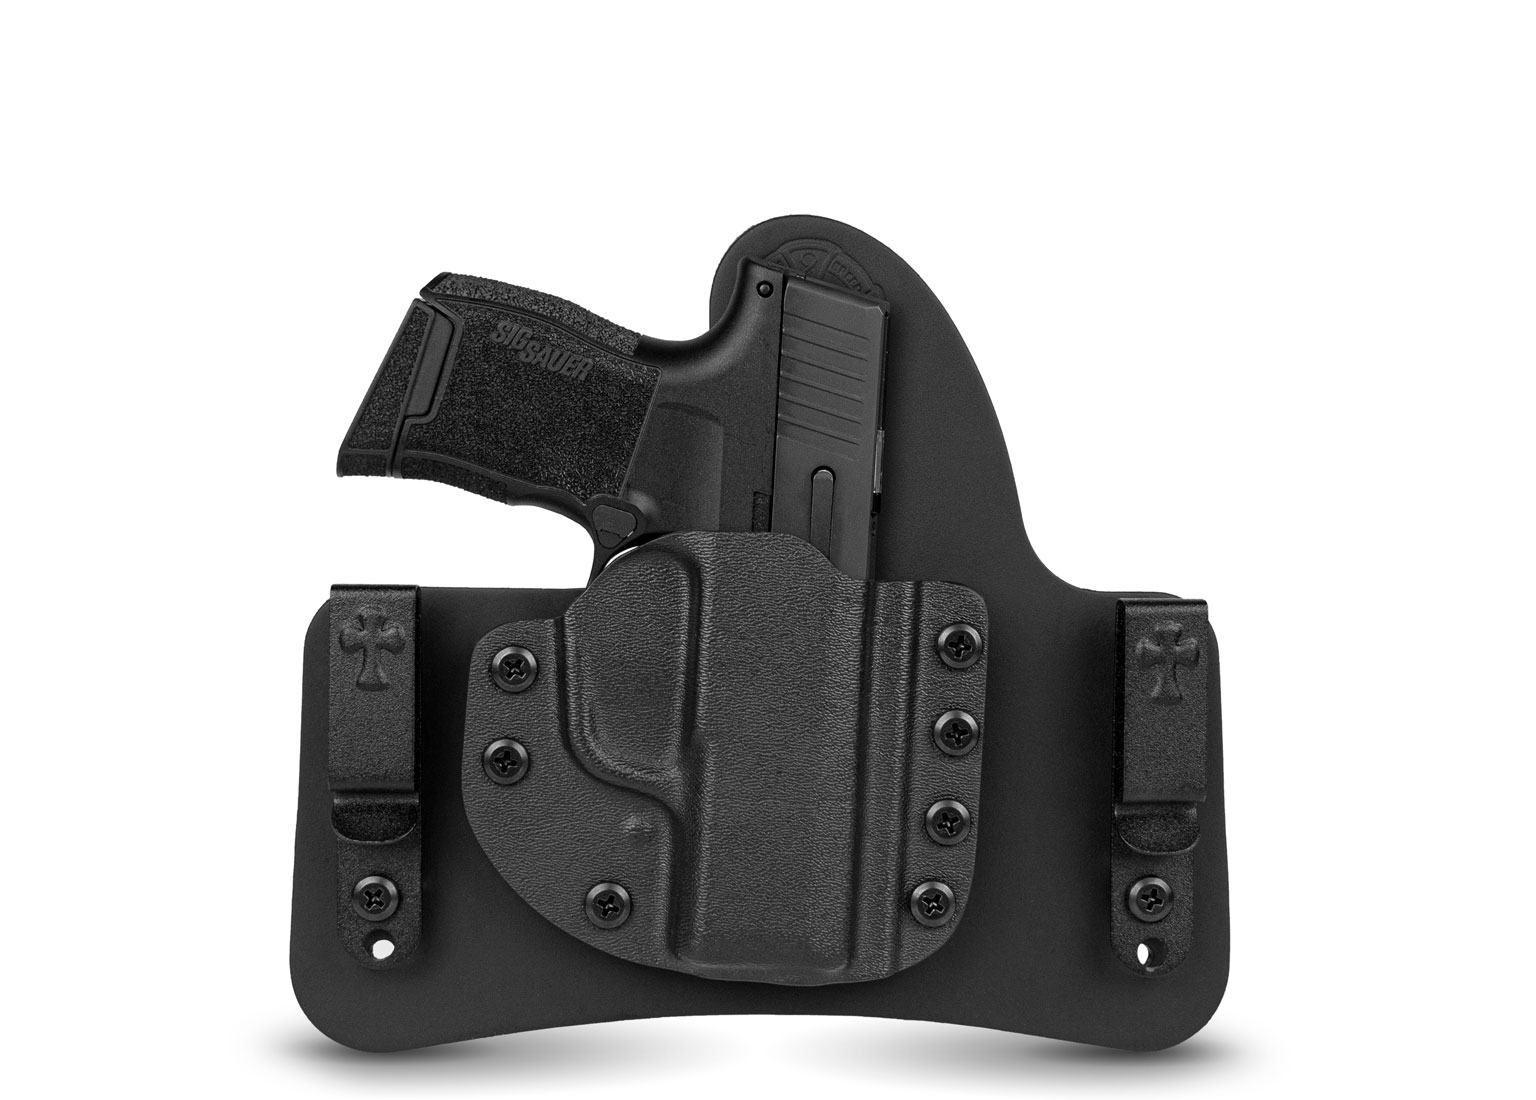 Details about   NT Hybrid IWB Holster for Springfield Handguns American Shield 2 